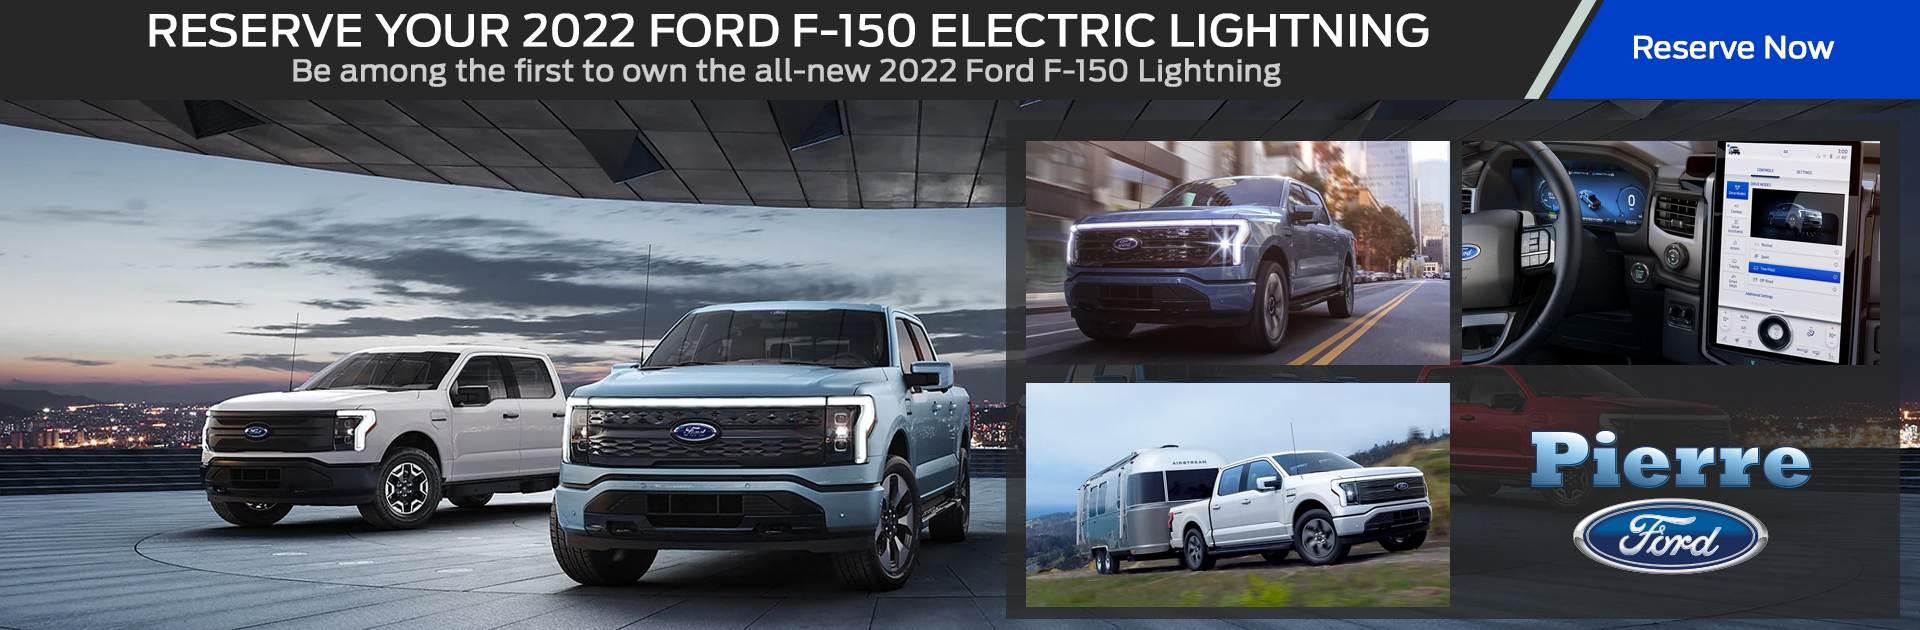 Reserve Your 2022 Ford F-150 Electric Lightning